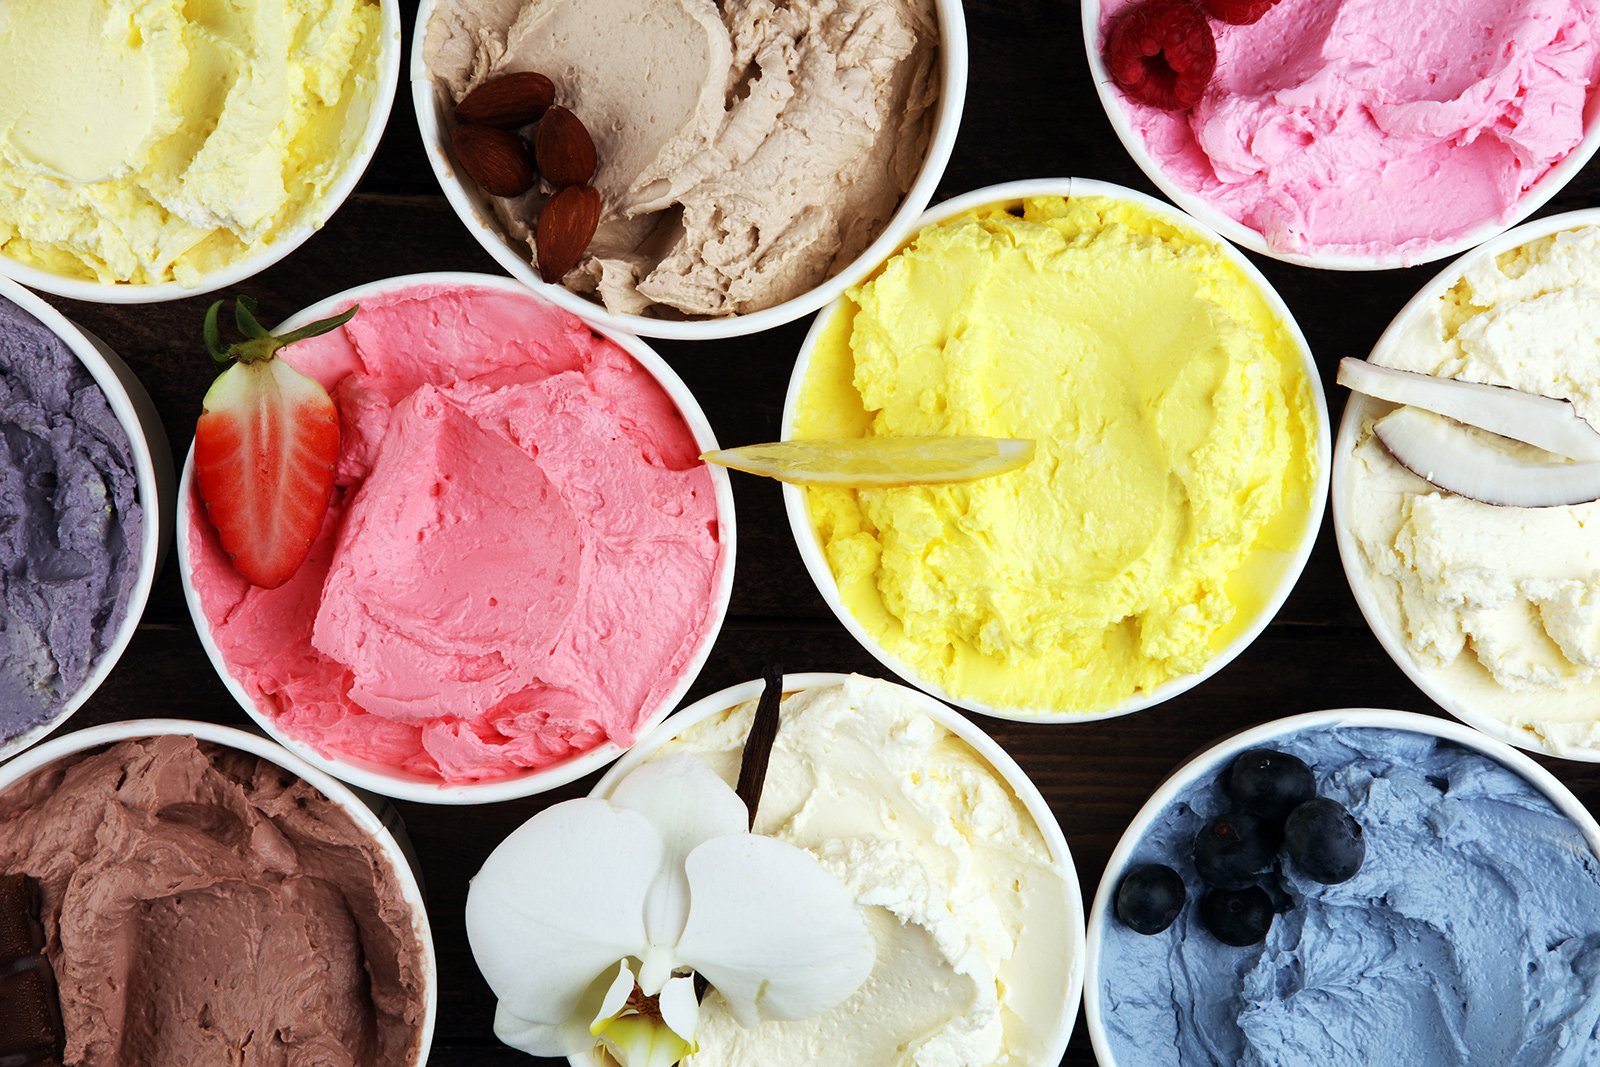 If you have any of these 100+ ice cream products, don’t eat them